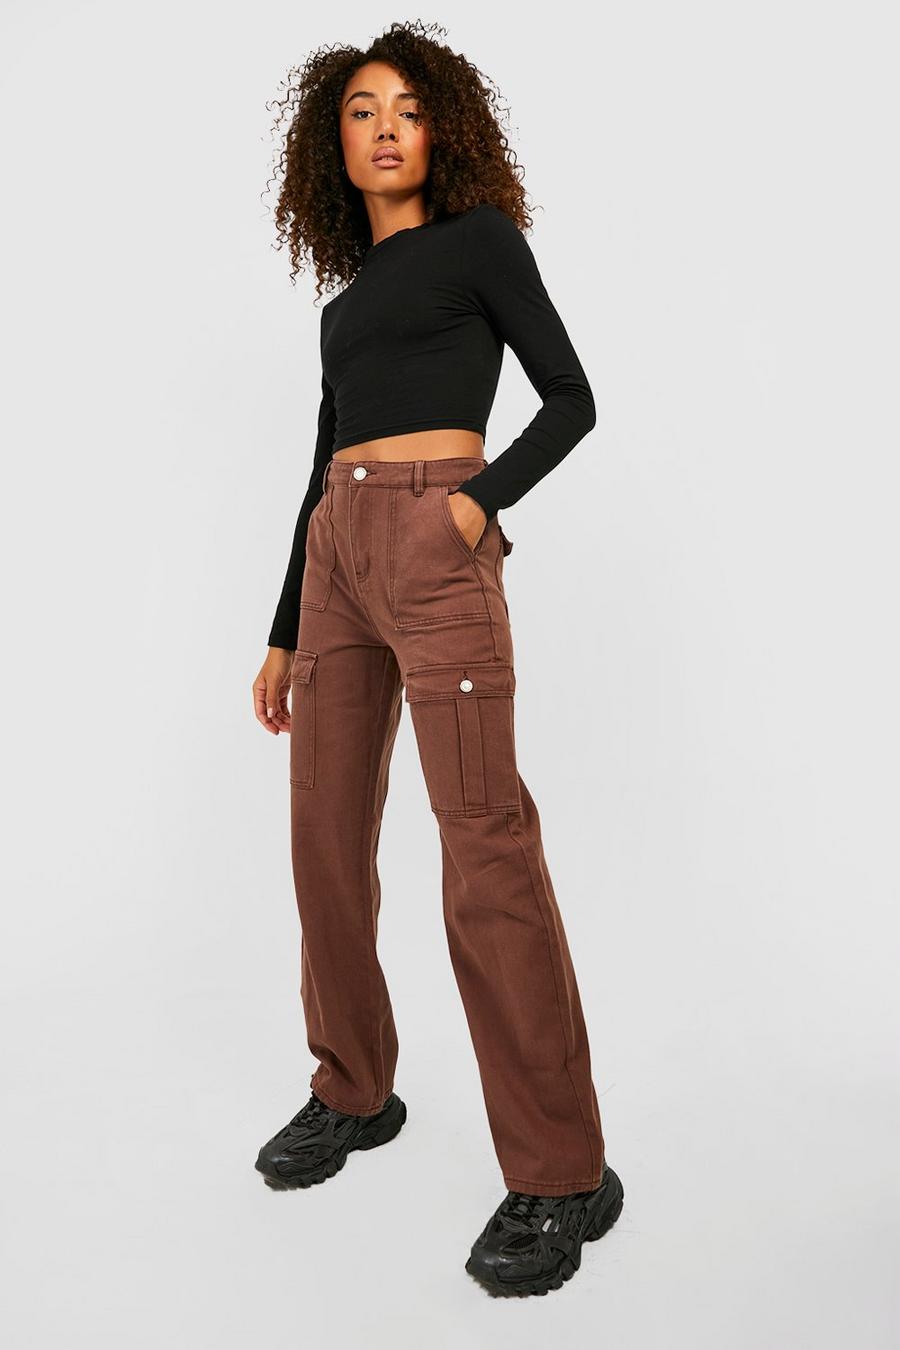 Tall Jeans | Jeans for Tall Women | boohoo USA